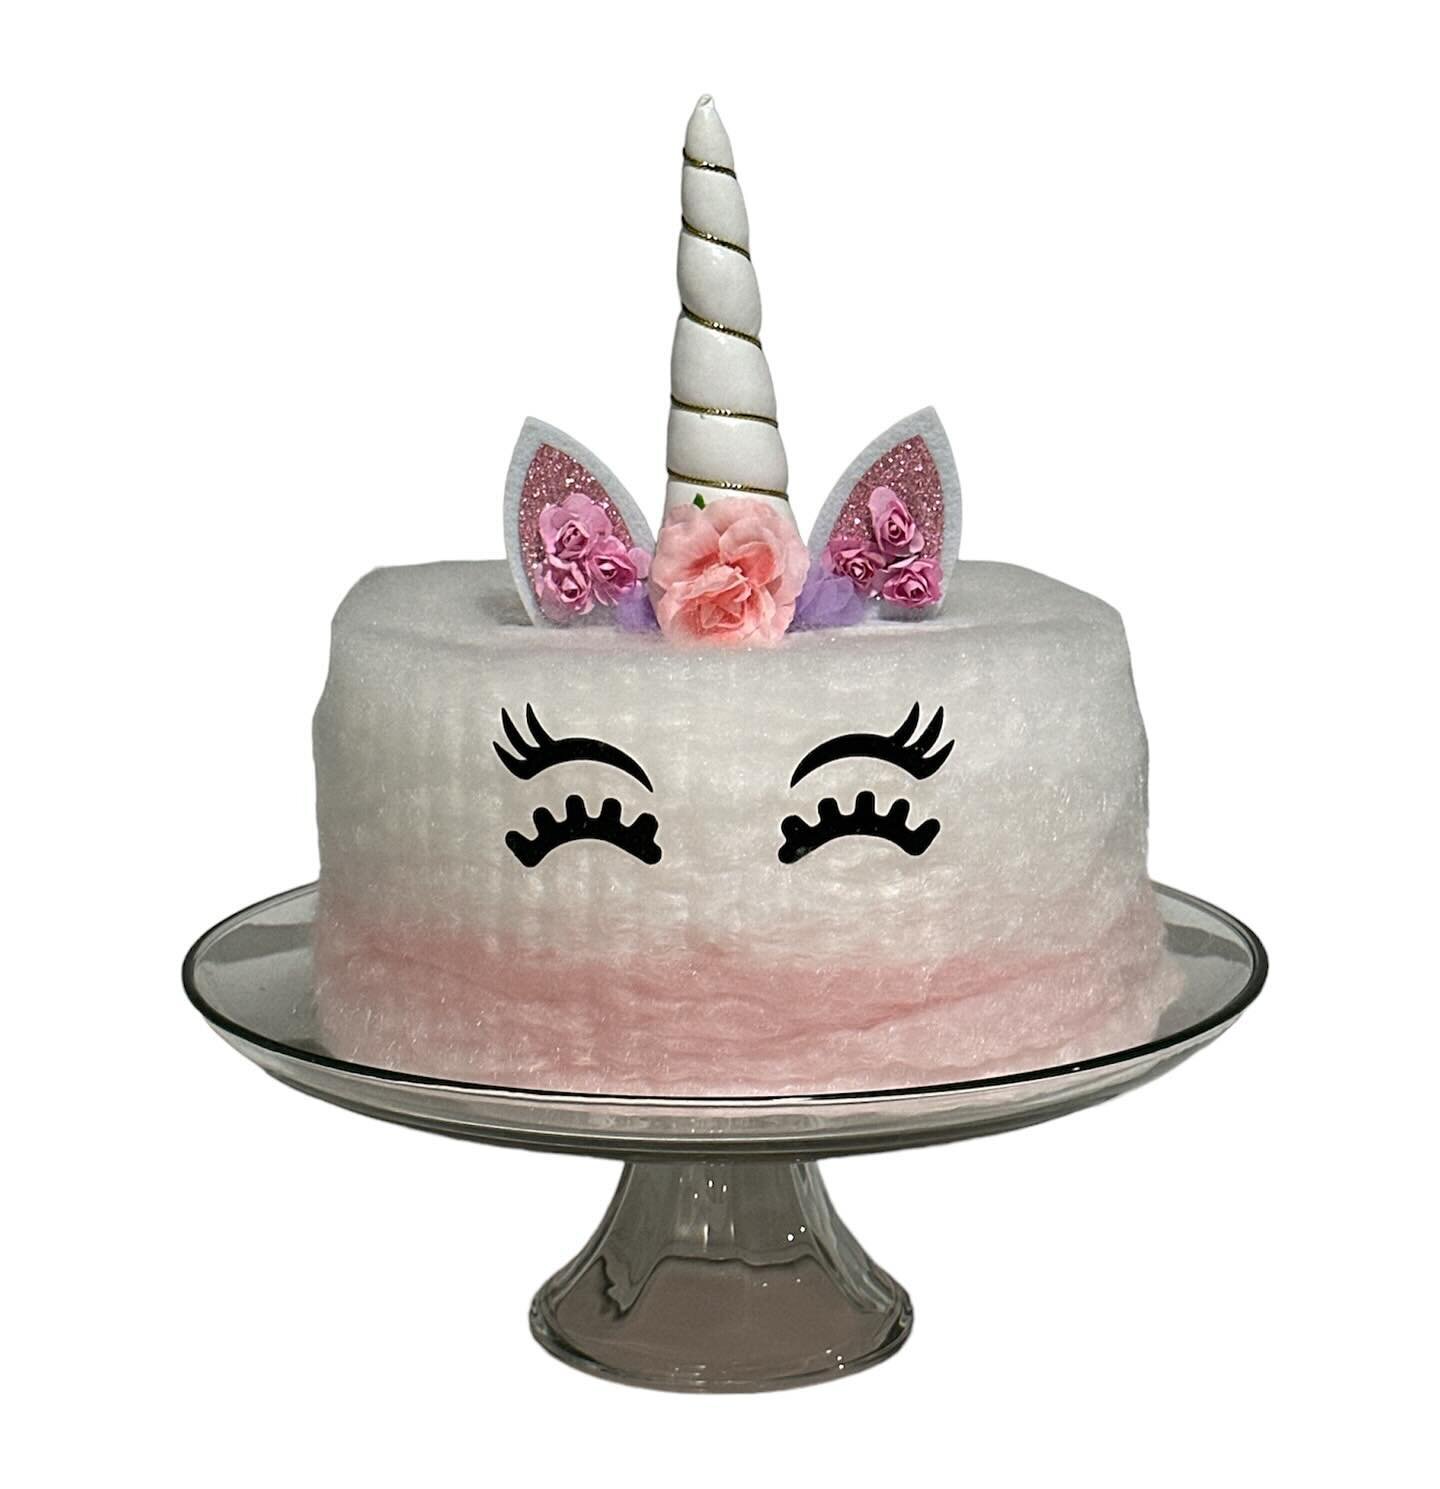 New product release! Add this adorable unicorn cotton candy cake to your next party. Contact us if you would like to order!